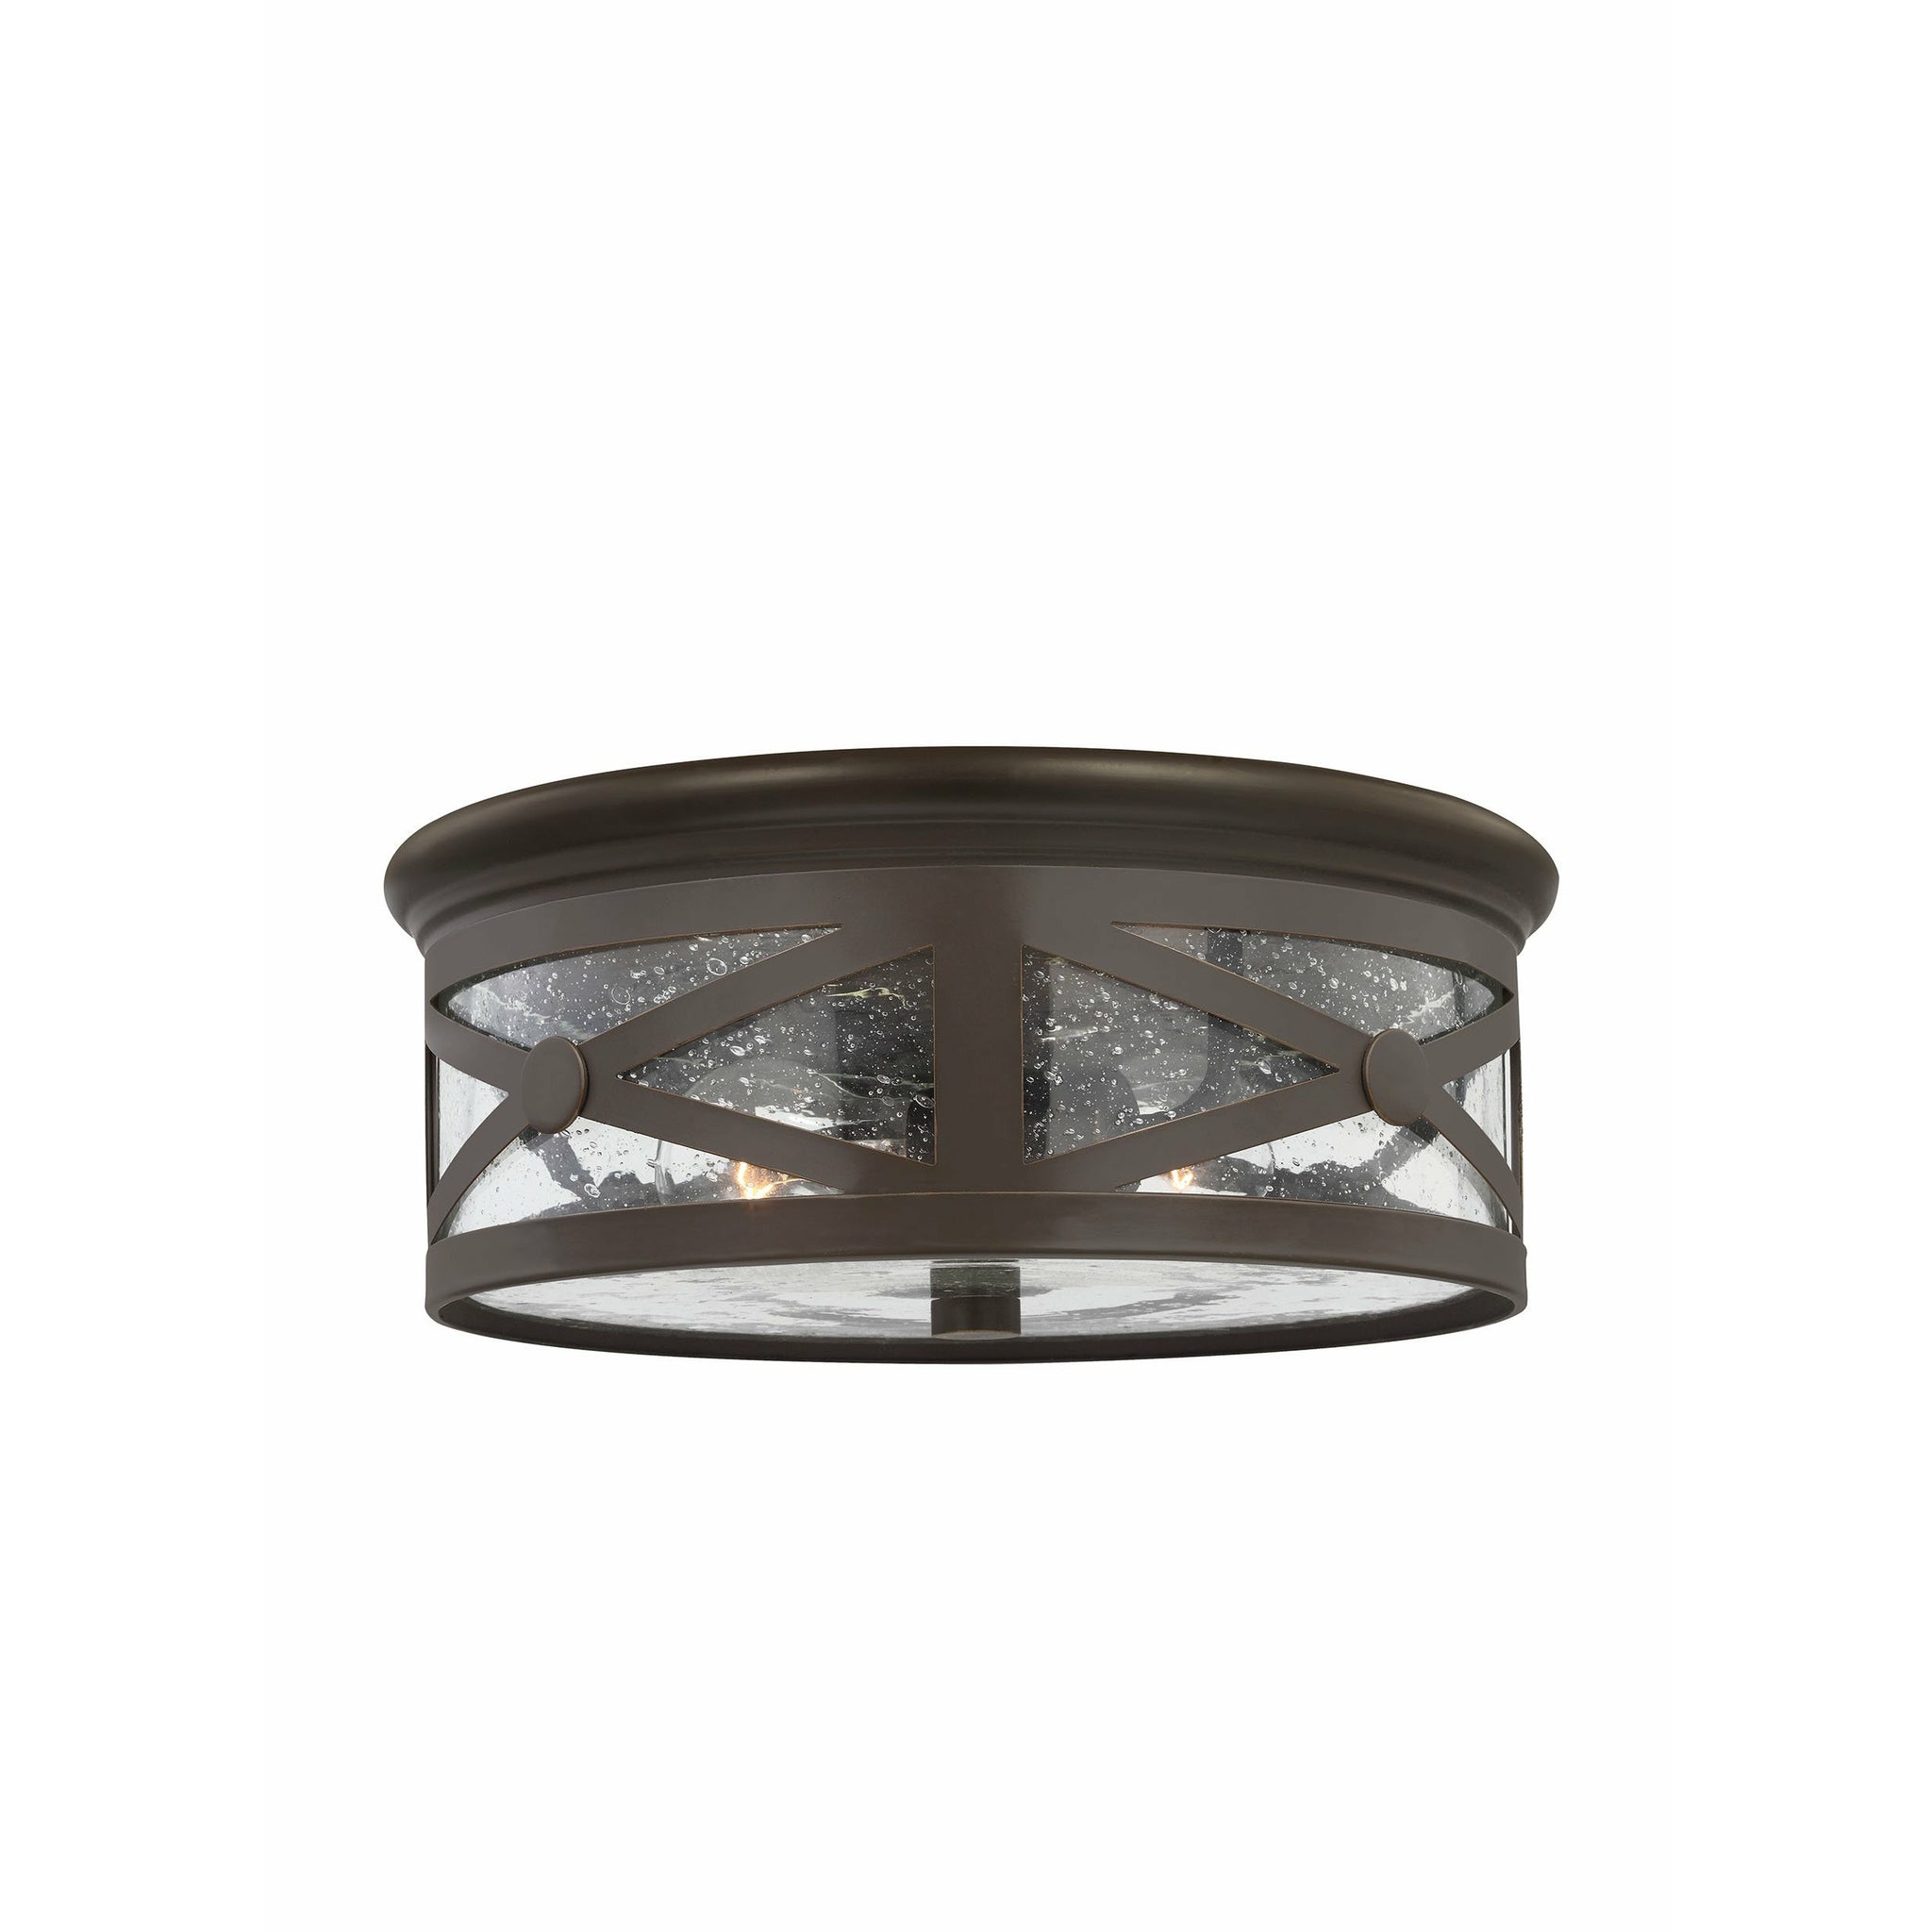 Lakeview Outdoor Ceiling Light Antique Bronze